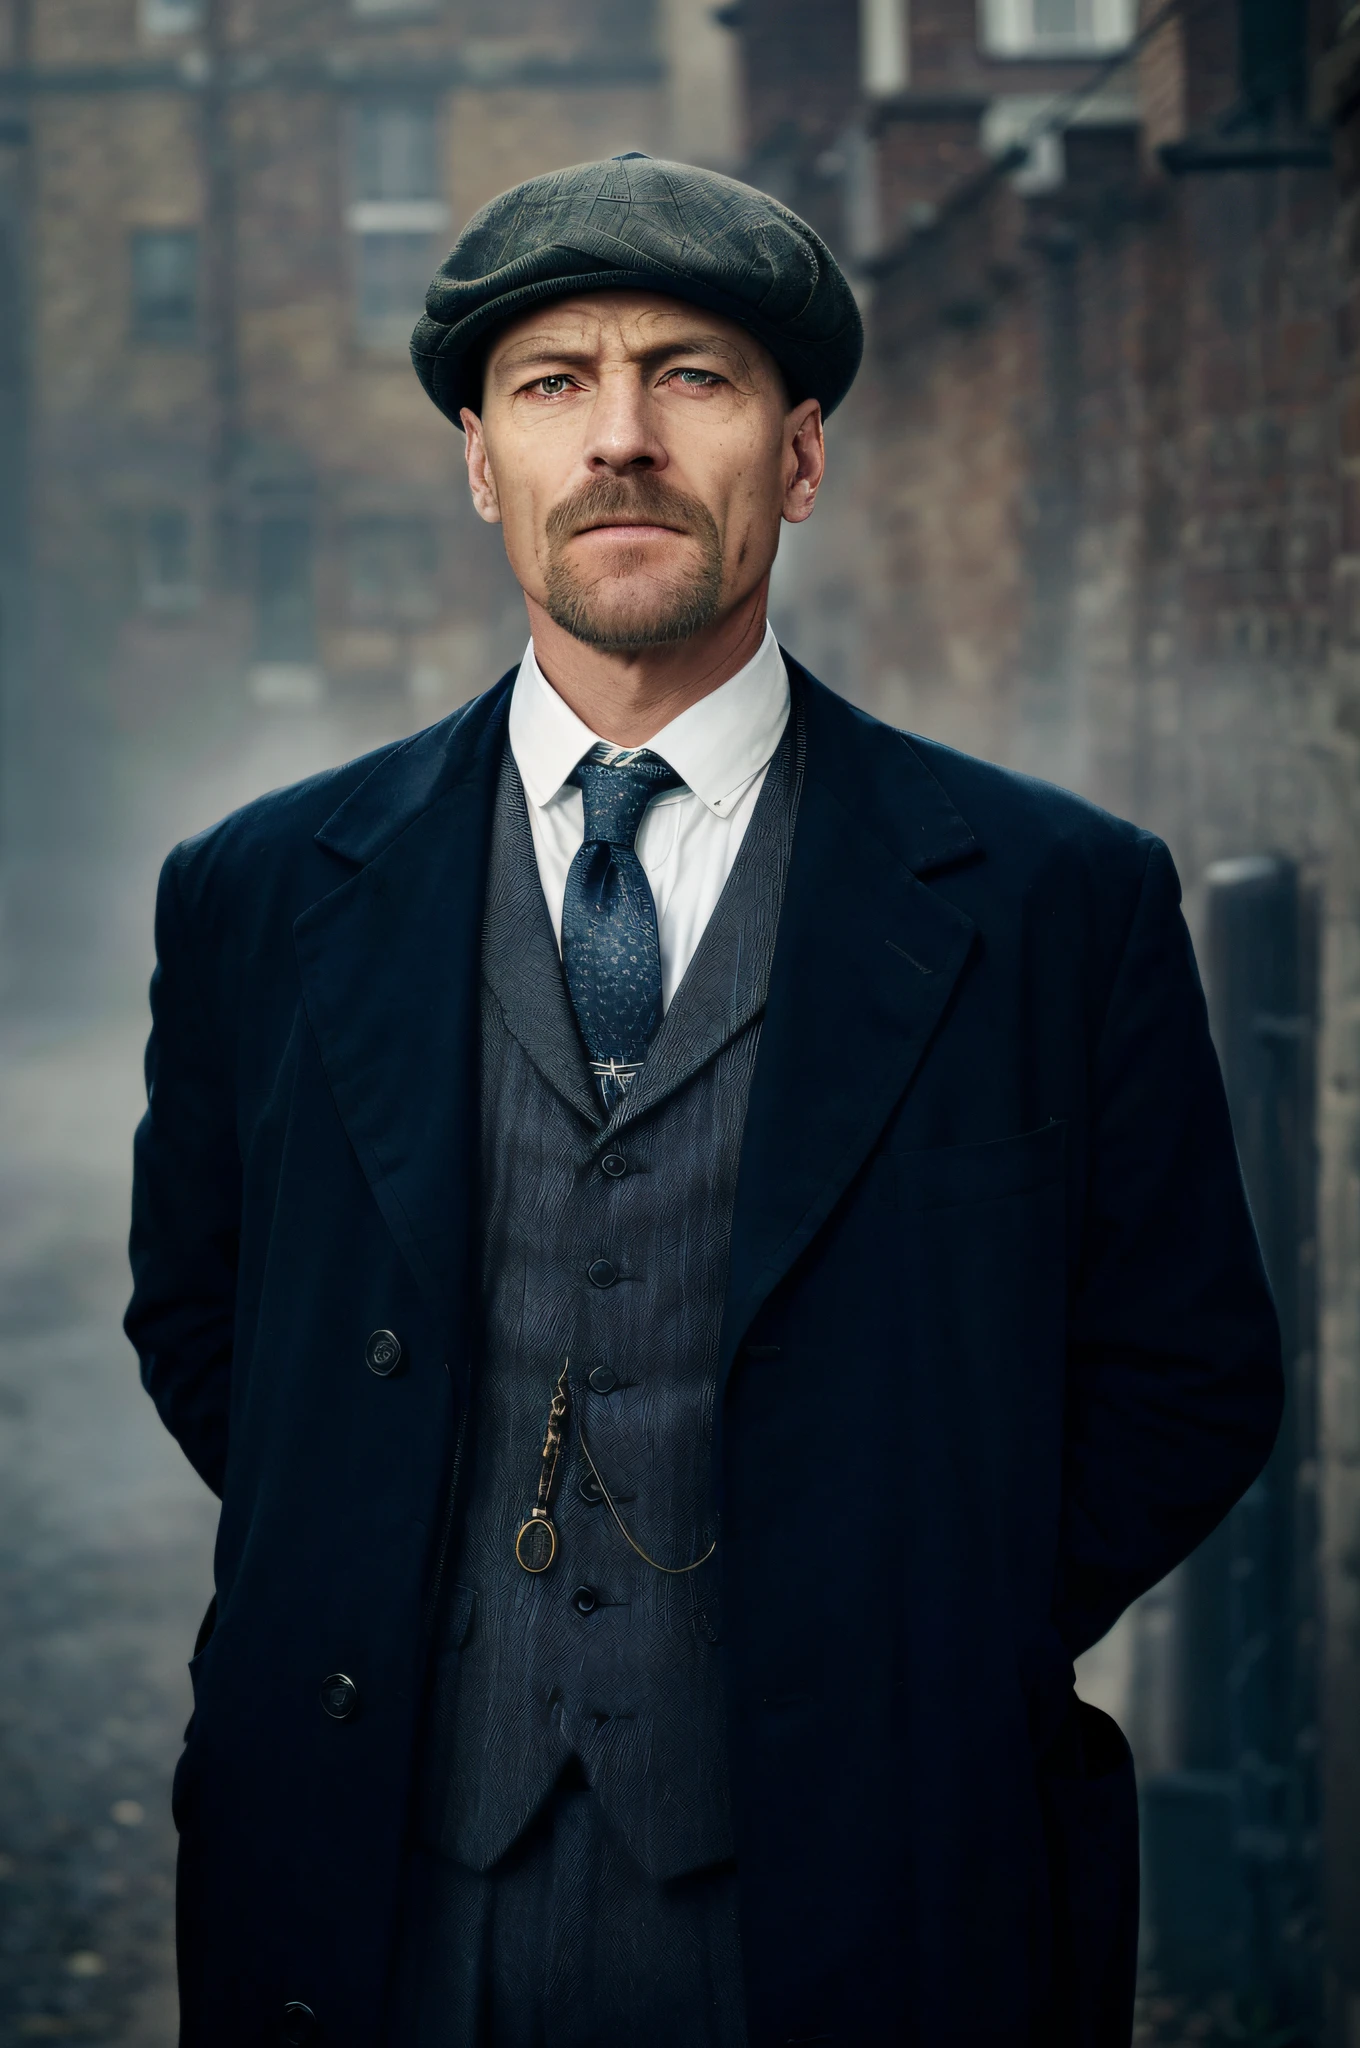 there is a man in a suit and tie standing in a street, peaky blinders, costumes from peaky blinders, peaky blinders (2018), peaky blinders gang, inspired by Max Magnus Norman, tom hardy as henry dorsett case, sherlock holmes, portrait of sherlock holmes, a suited man in a hat